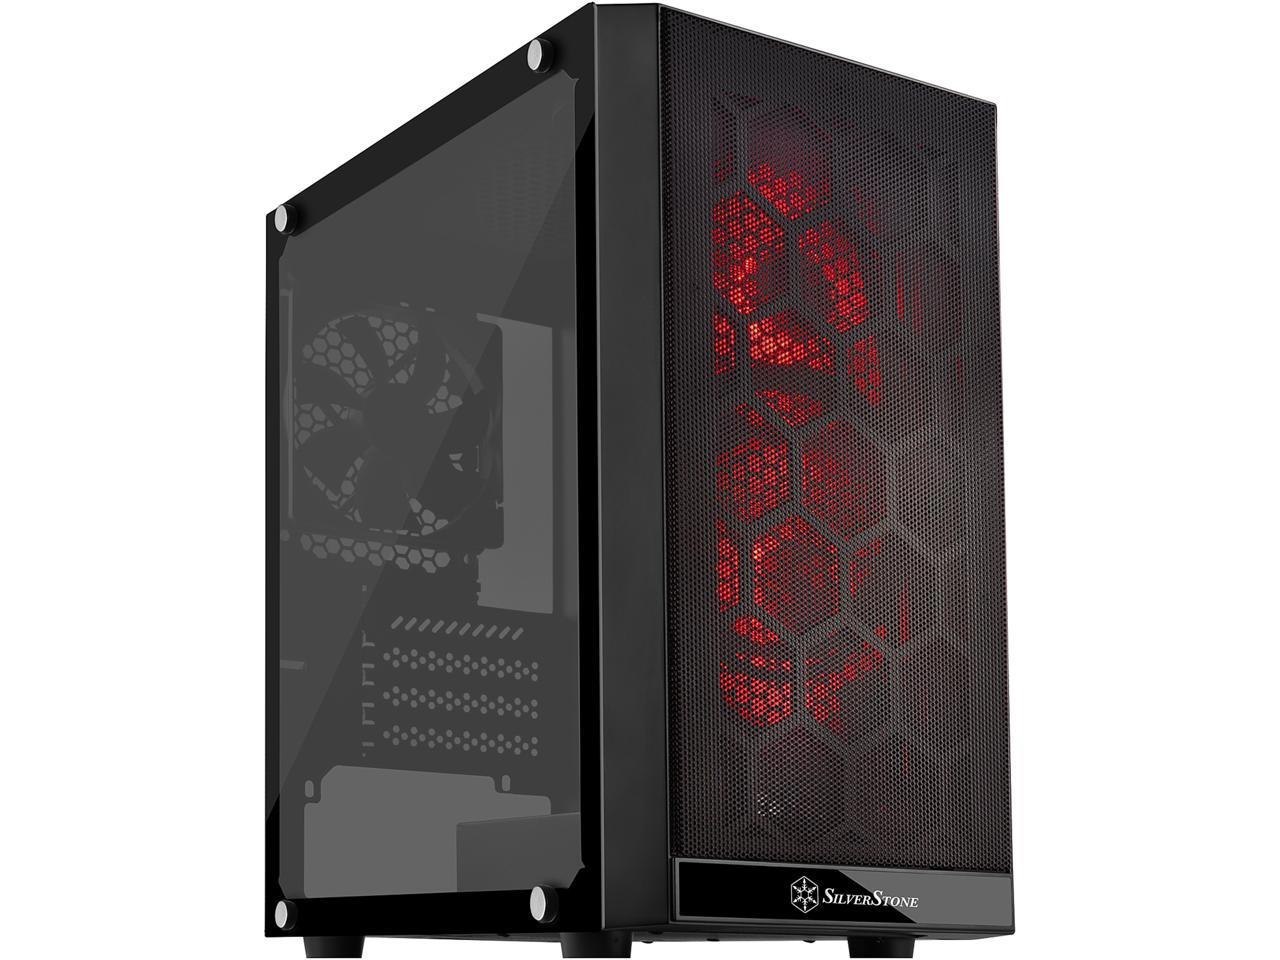 SilverStone PS15 SST-PS15B-RGB Black Steel / Plastic / Tempered Glass Micro Atx Tower Computer Case